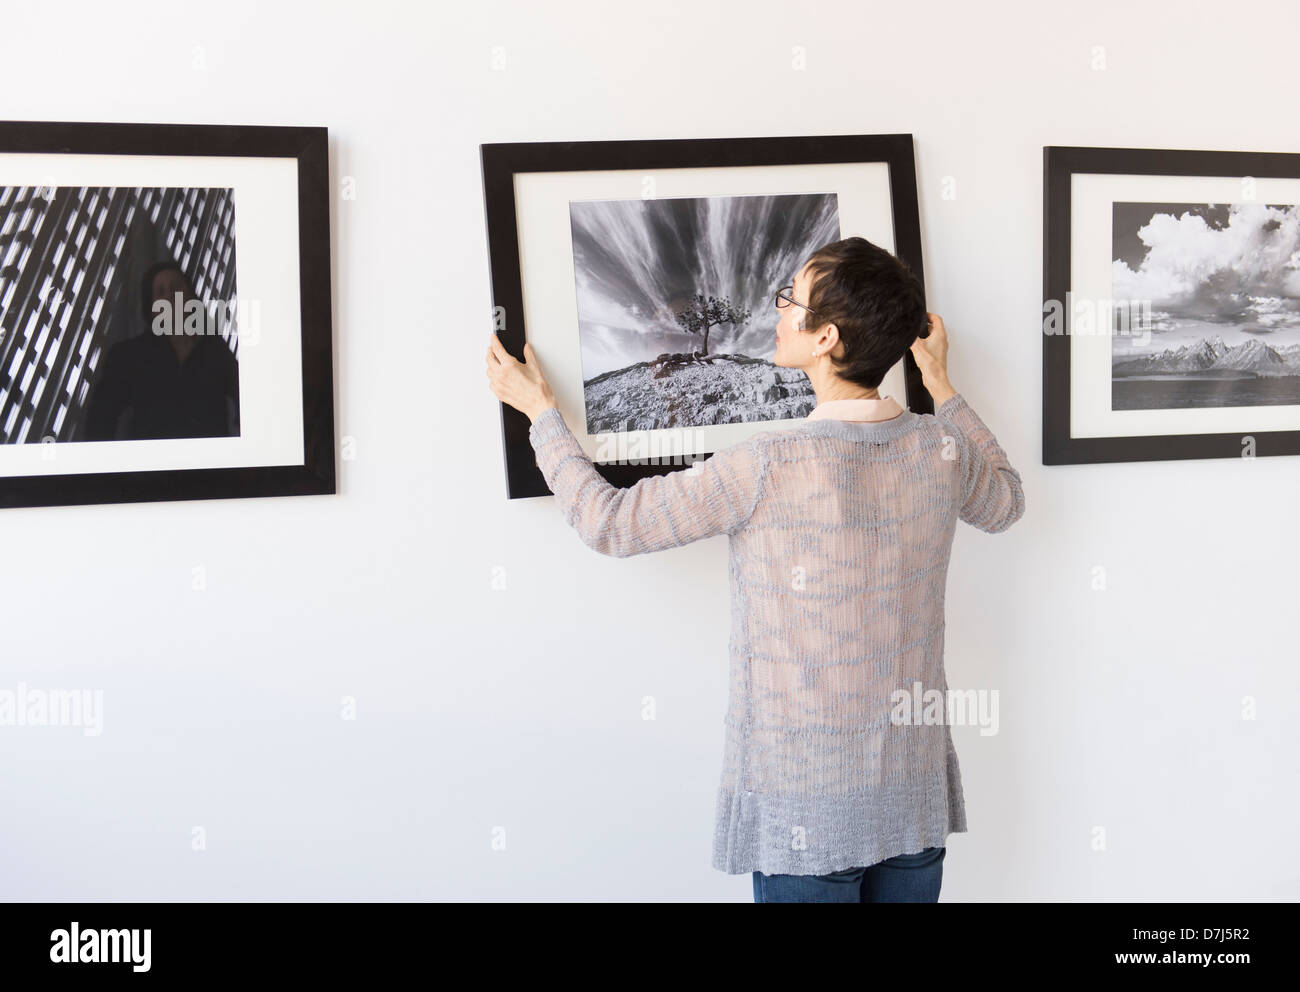 Woman hanging photographs in art gallery Stock Photo